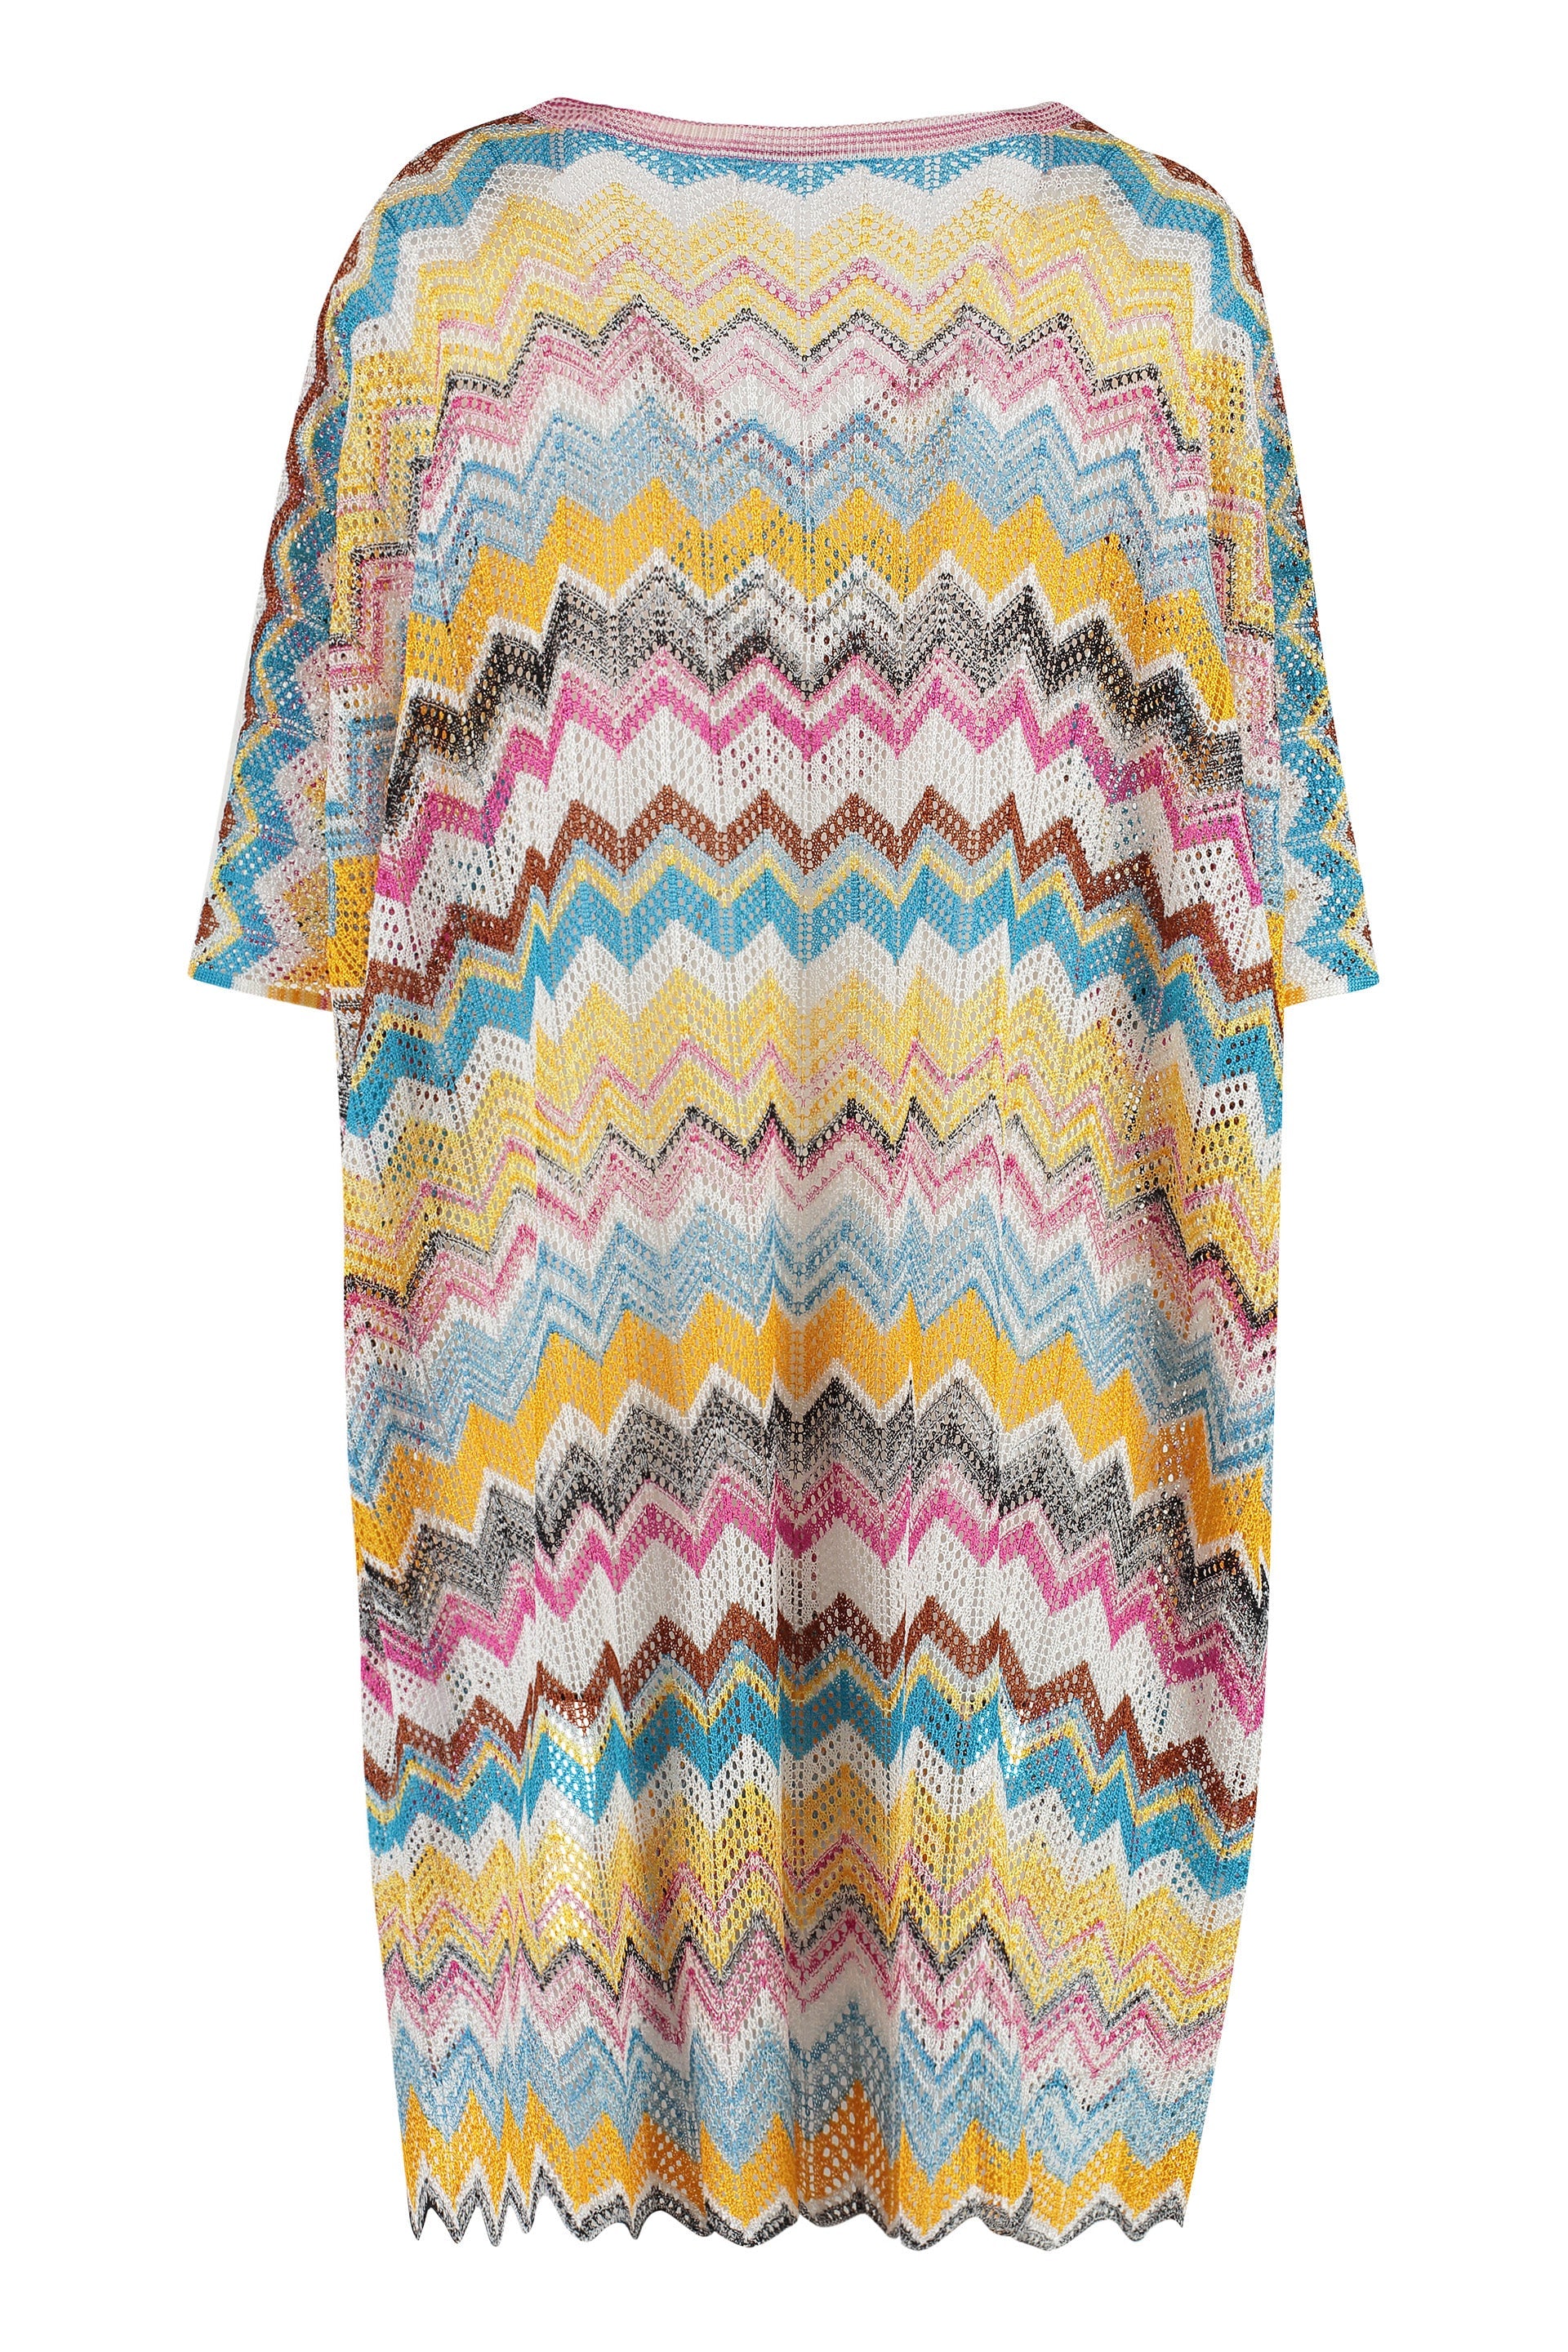 Missoni-OUTLET-SALE-Knitted-cover-up-dress-Kleider-Rocke-S-ARCHIVE-COLLECTION-2_a146cadf-7834-437e-8f2a-a6c2ddaa8364.jpg